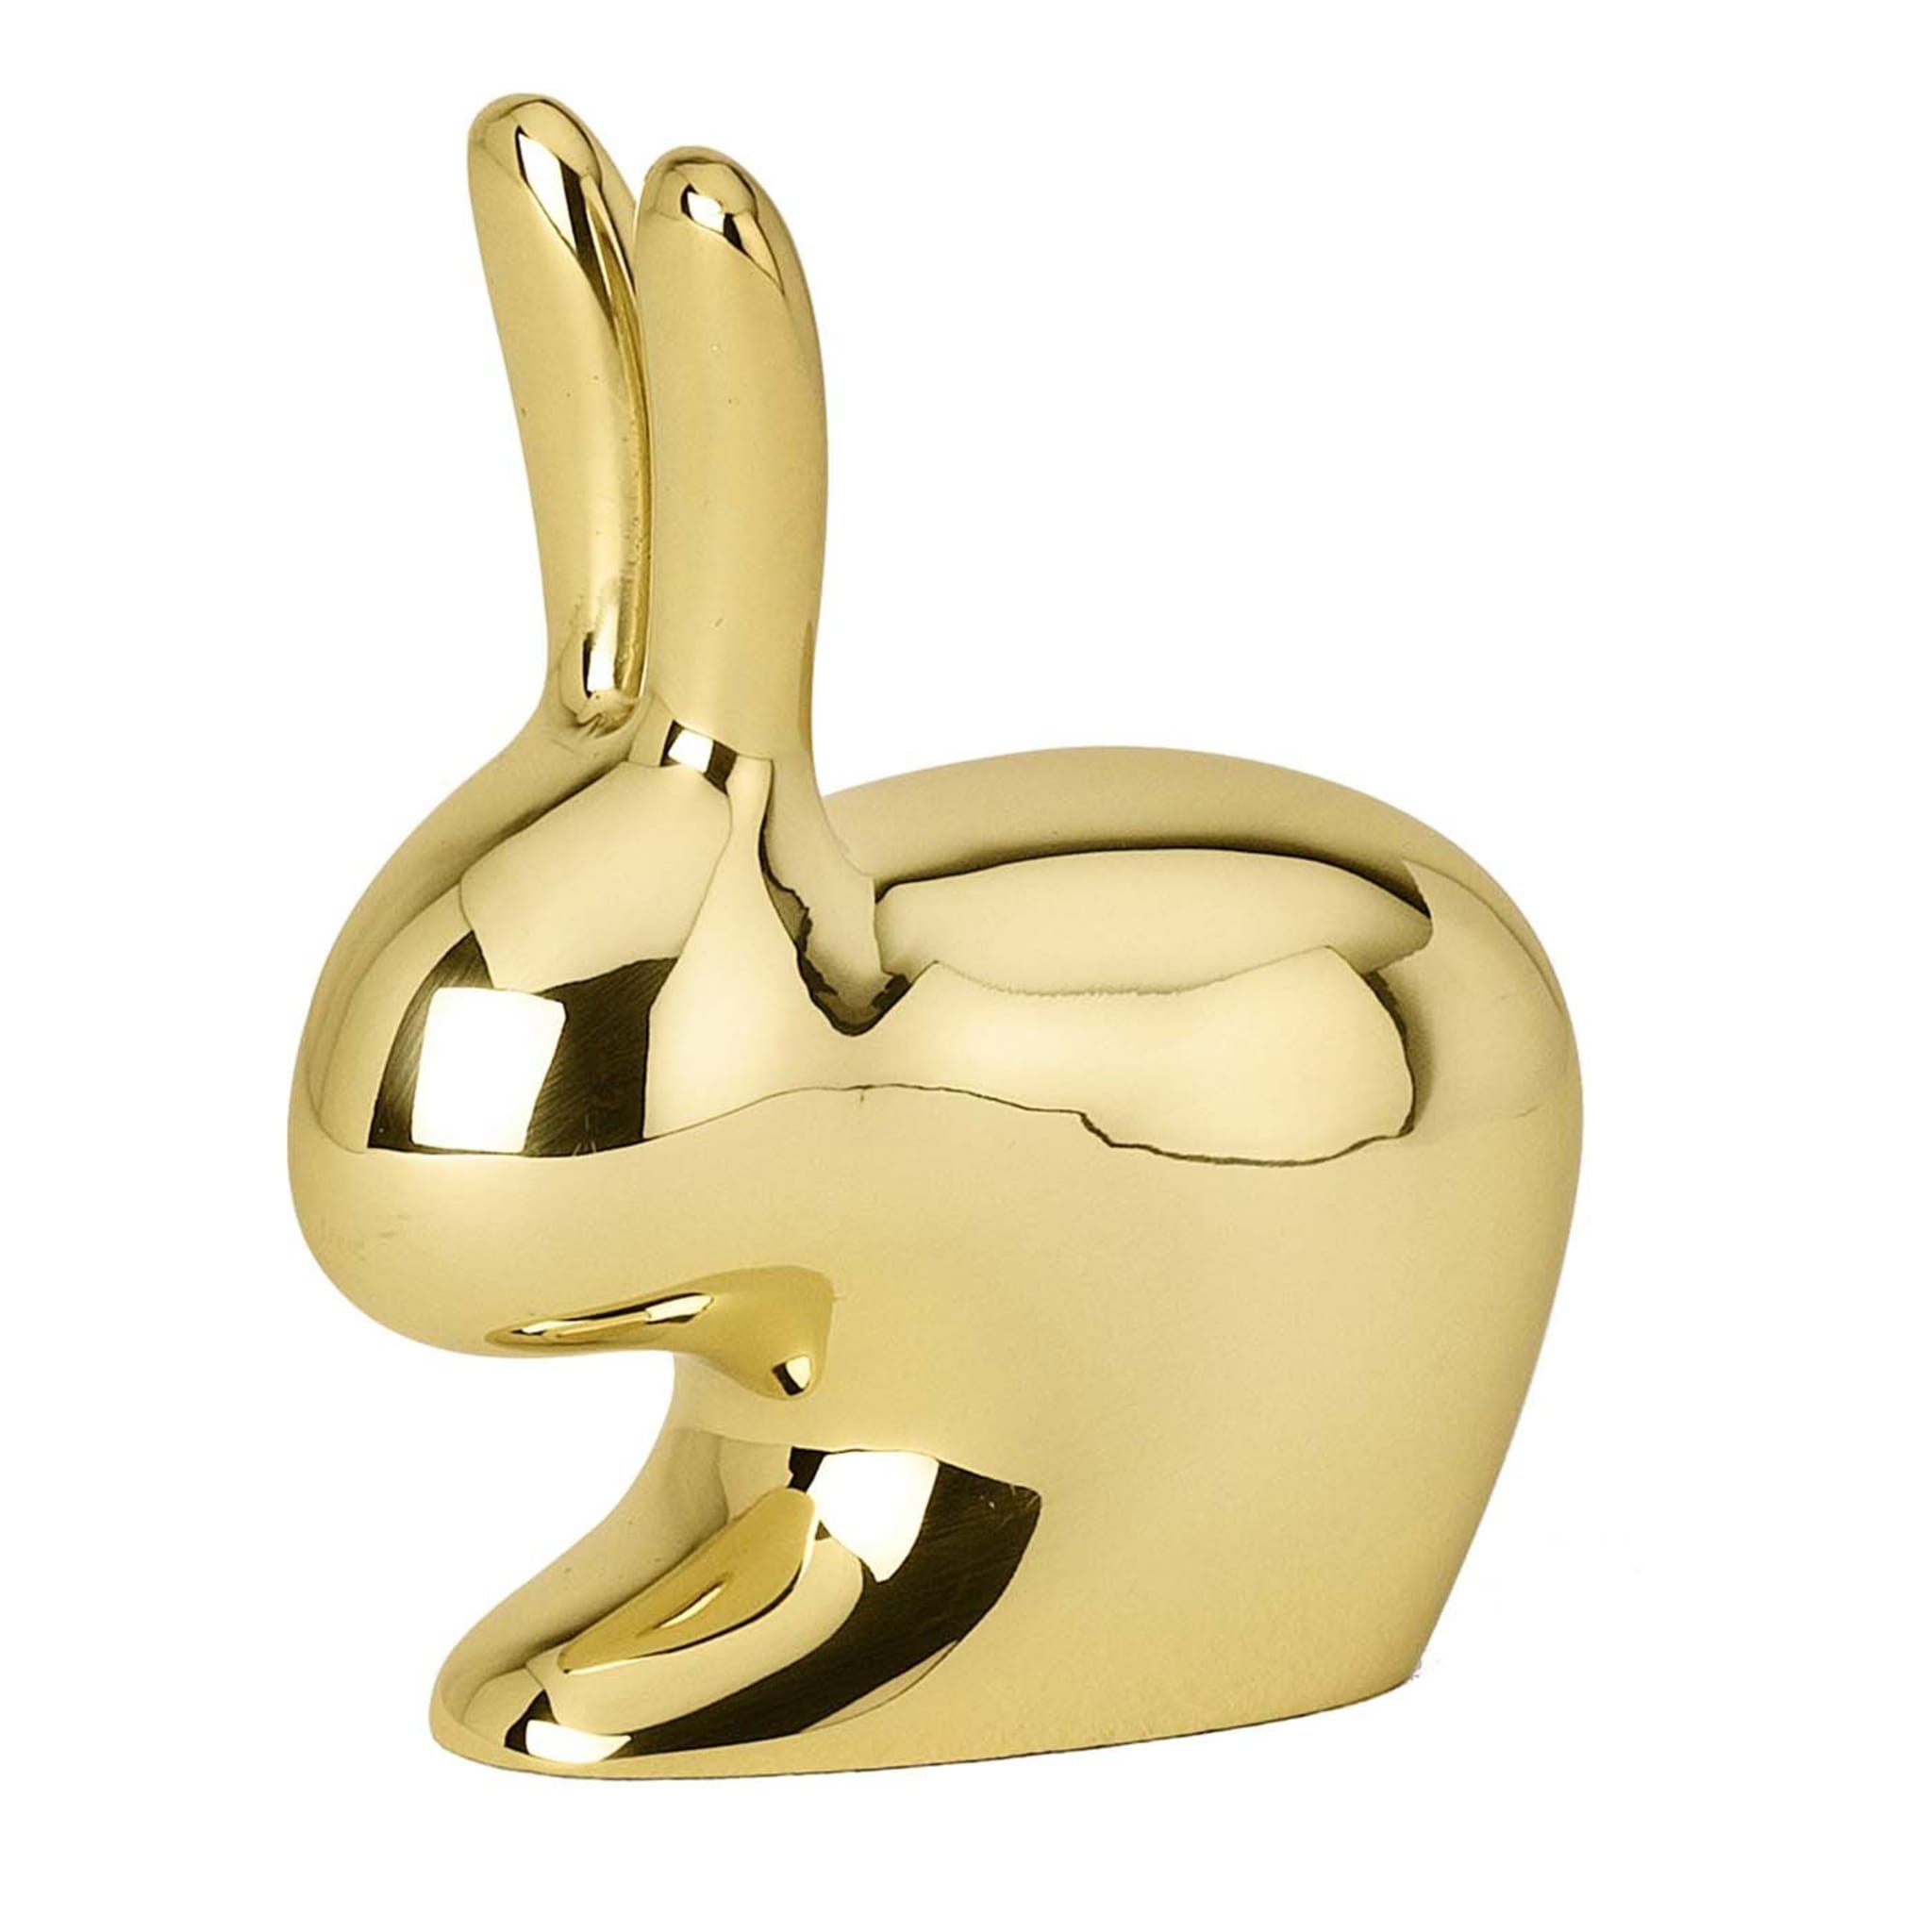 Rabbit Paperweight by Stefano Giovannoni - Main view